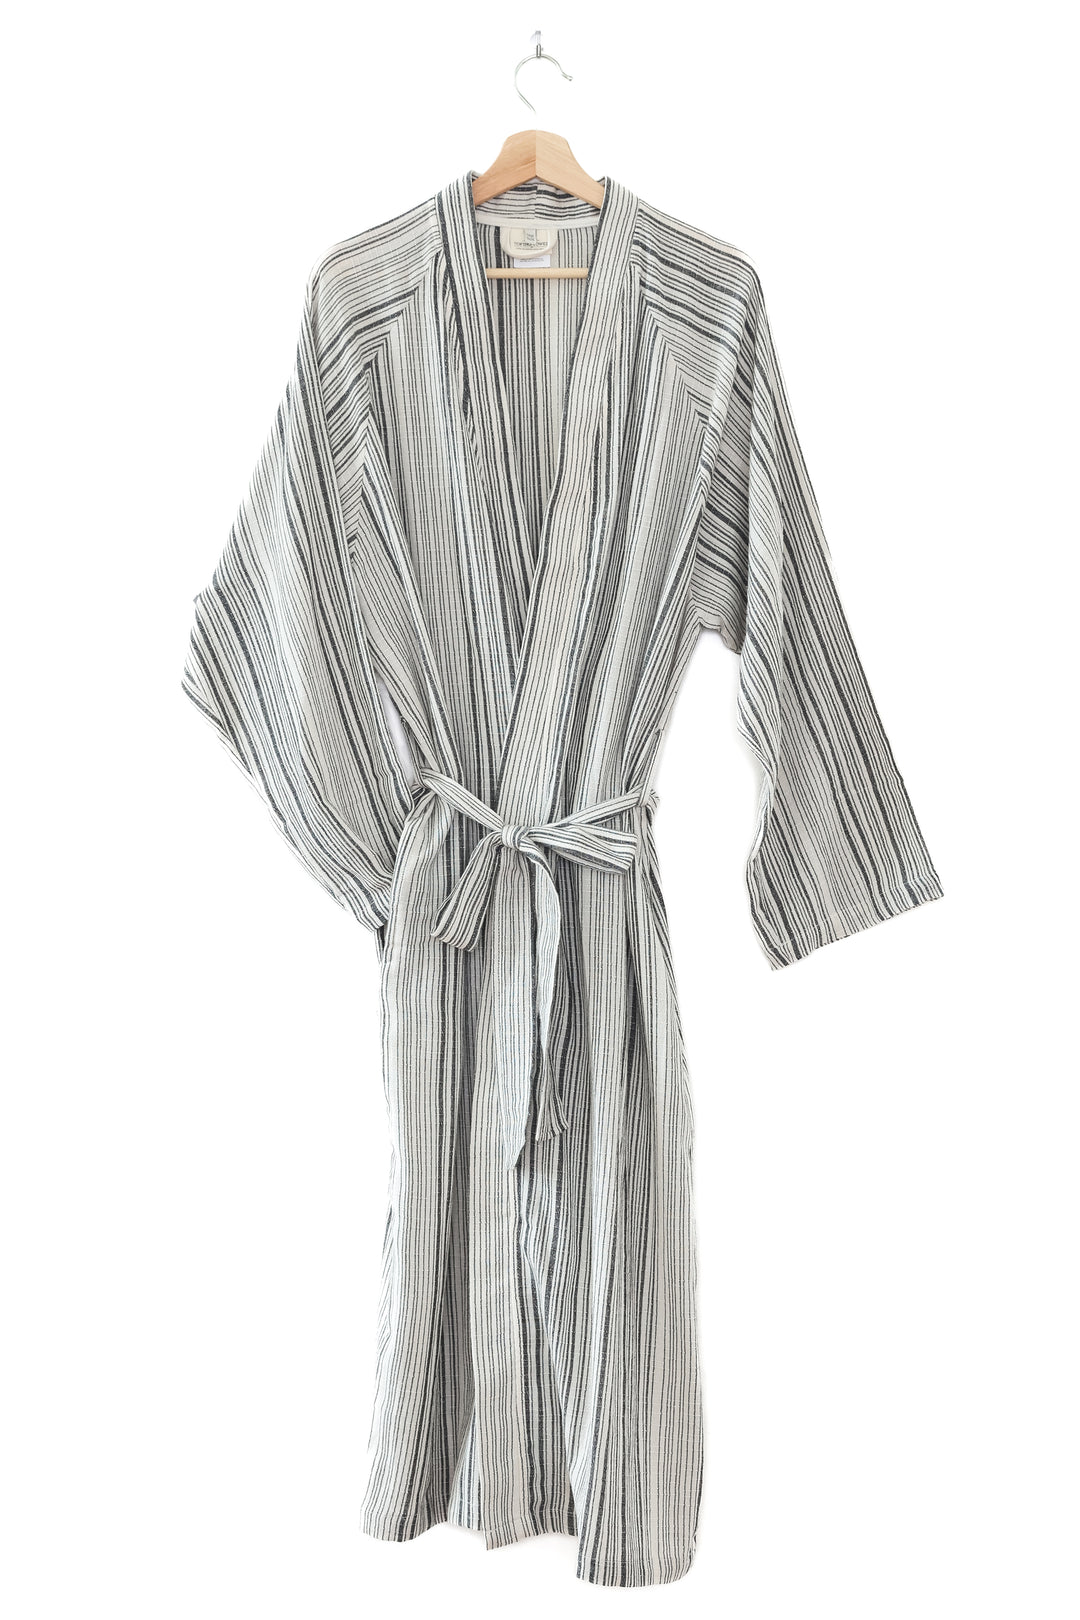 THE LEON | Belted Cover-Up